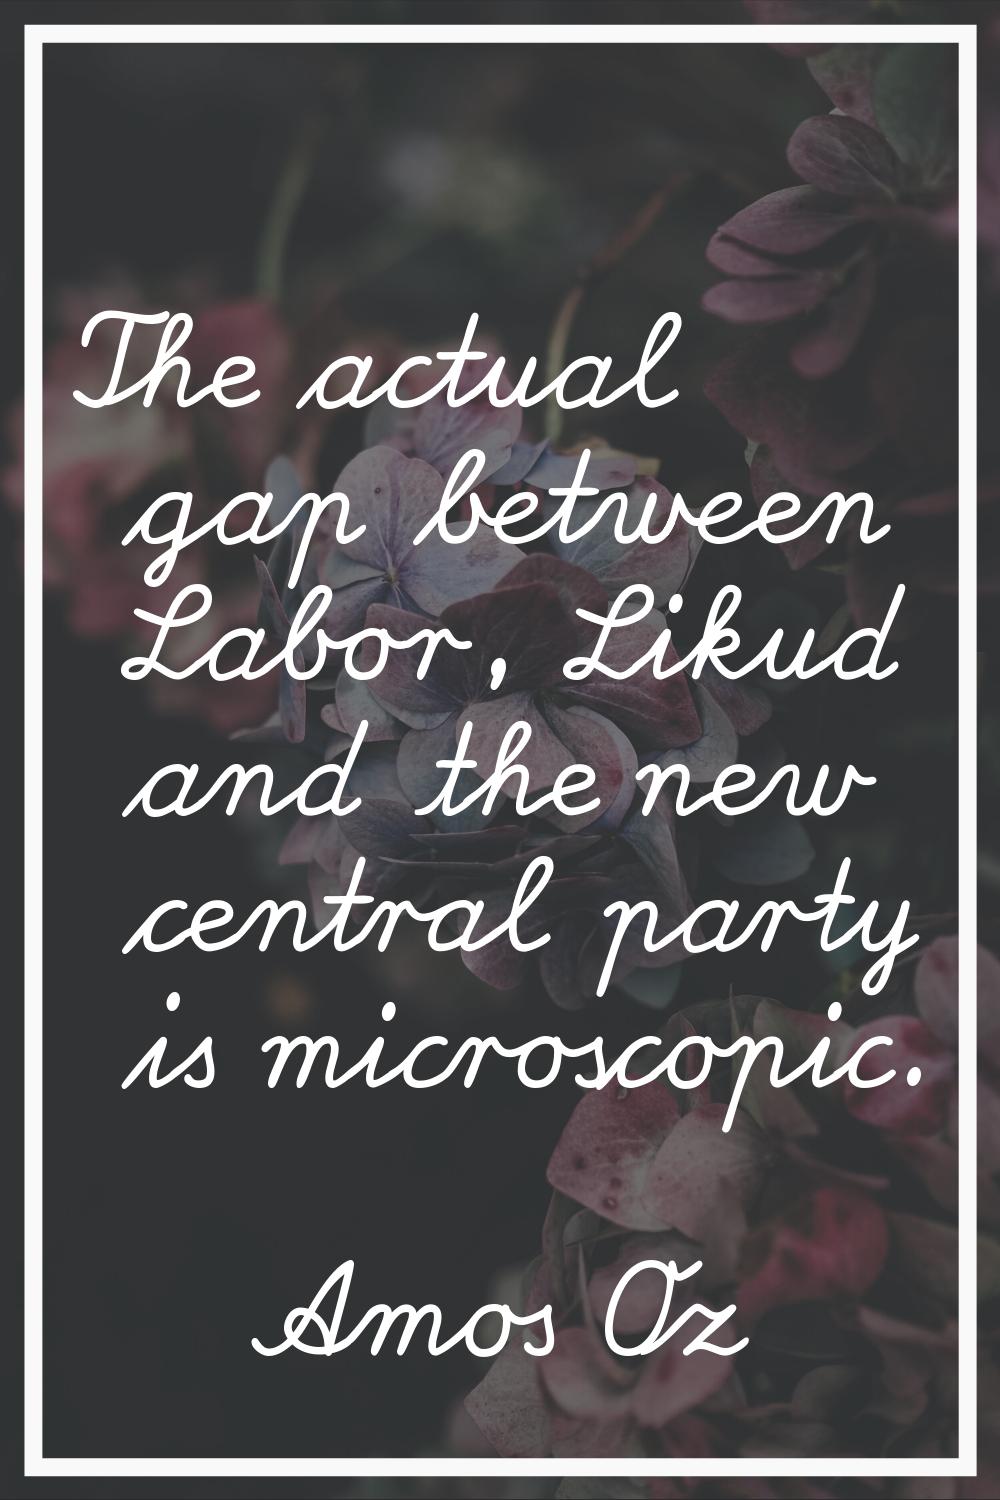 The actual gap between Labor, Likud and the new central party is microscopic.